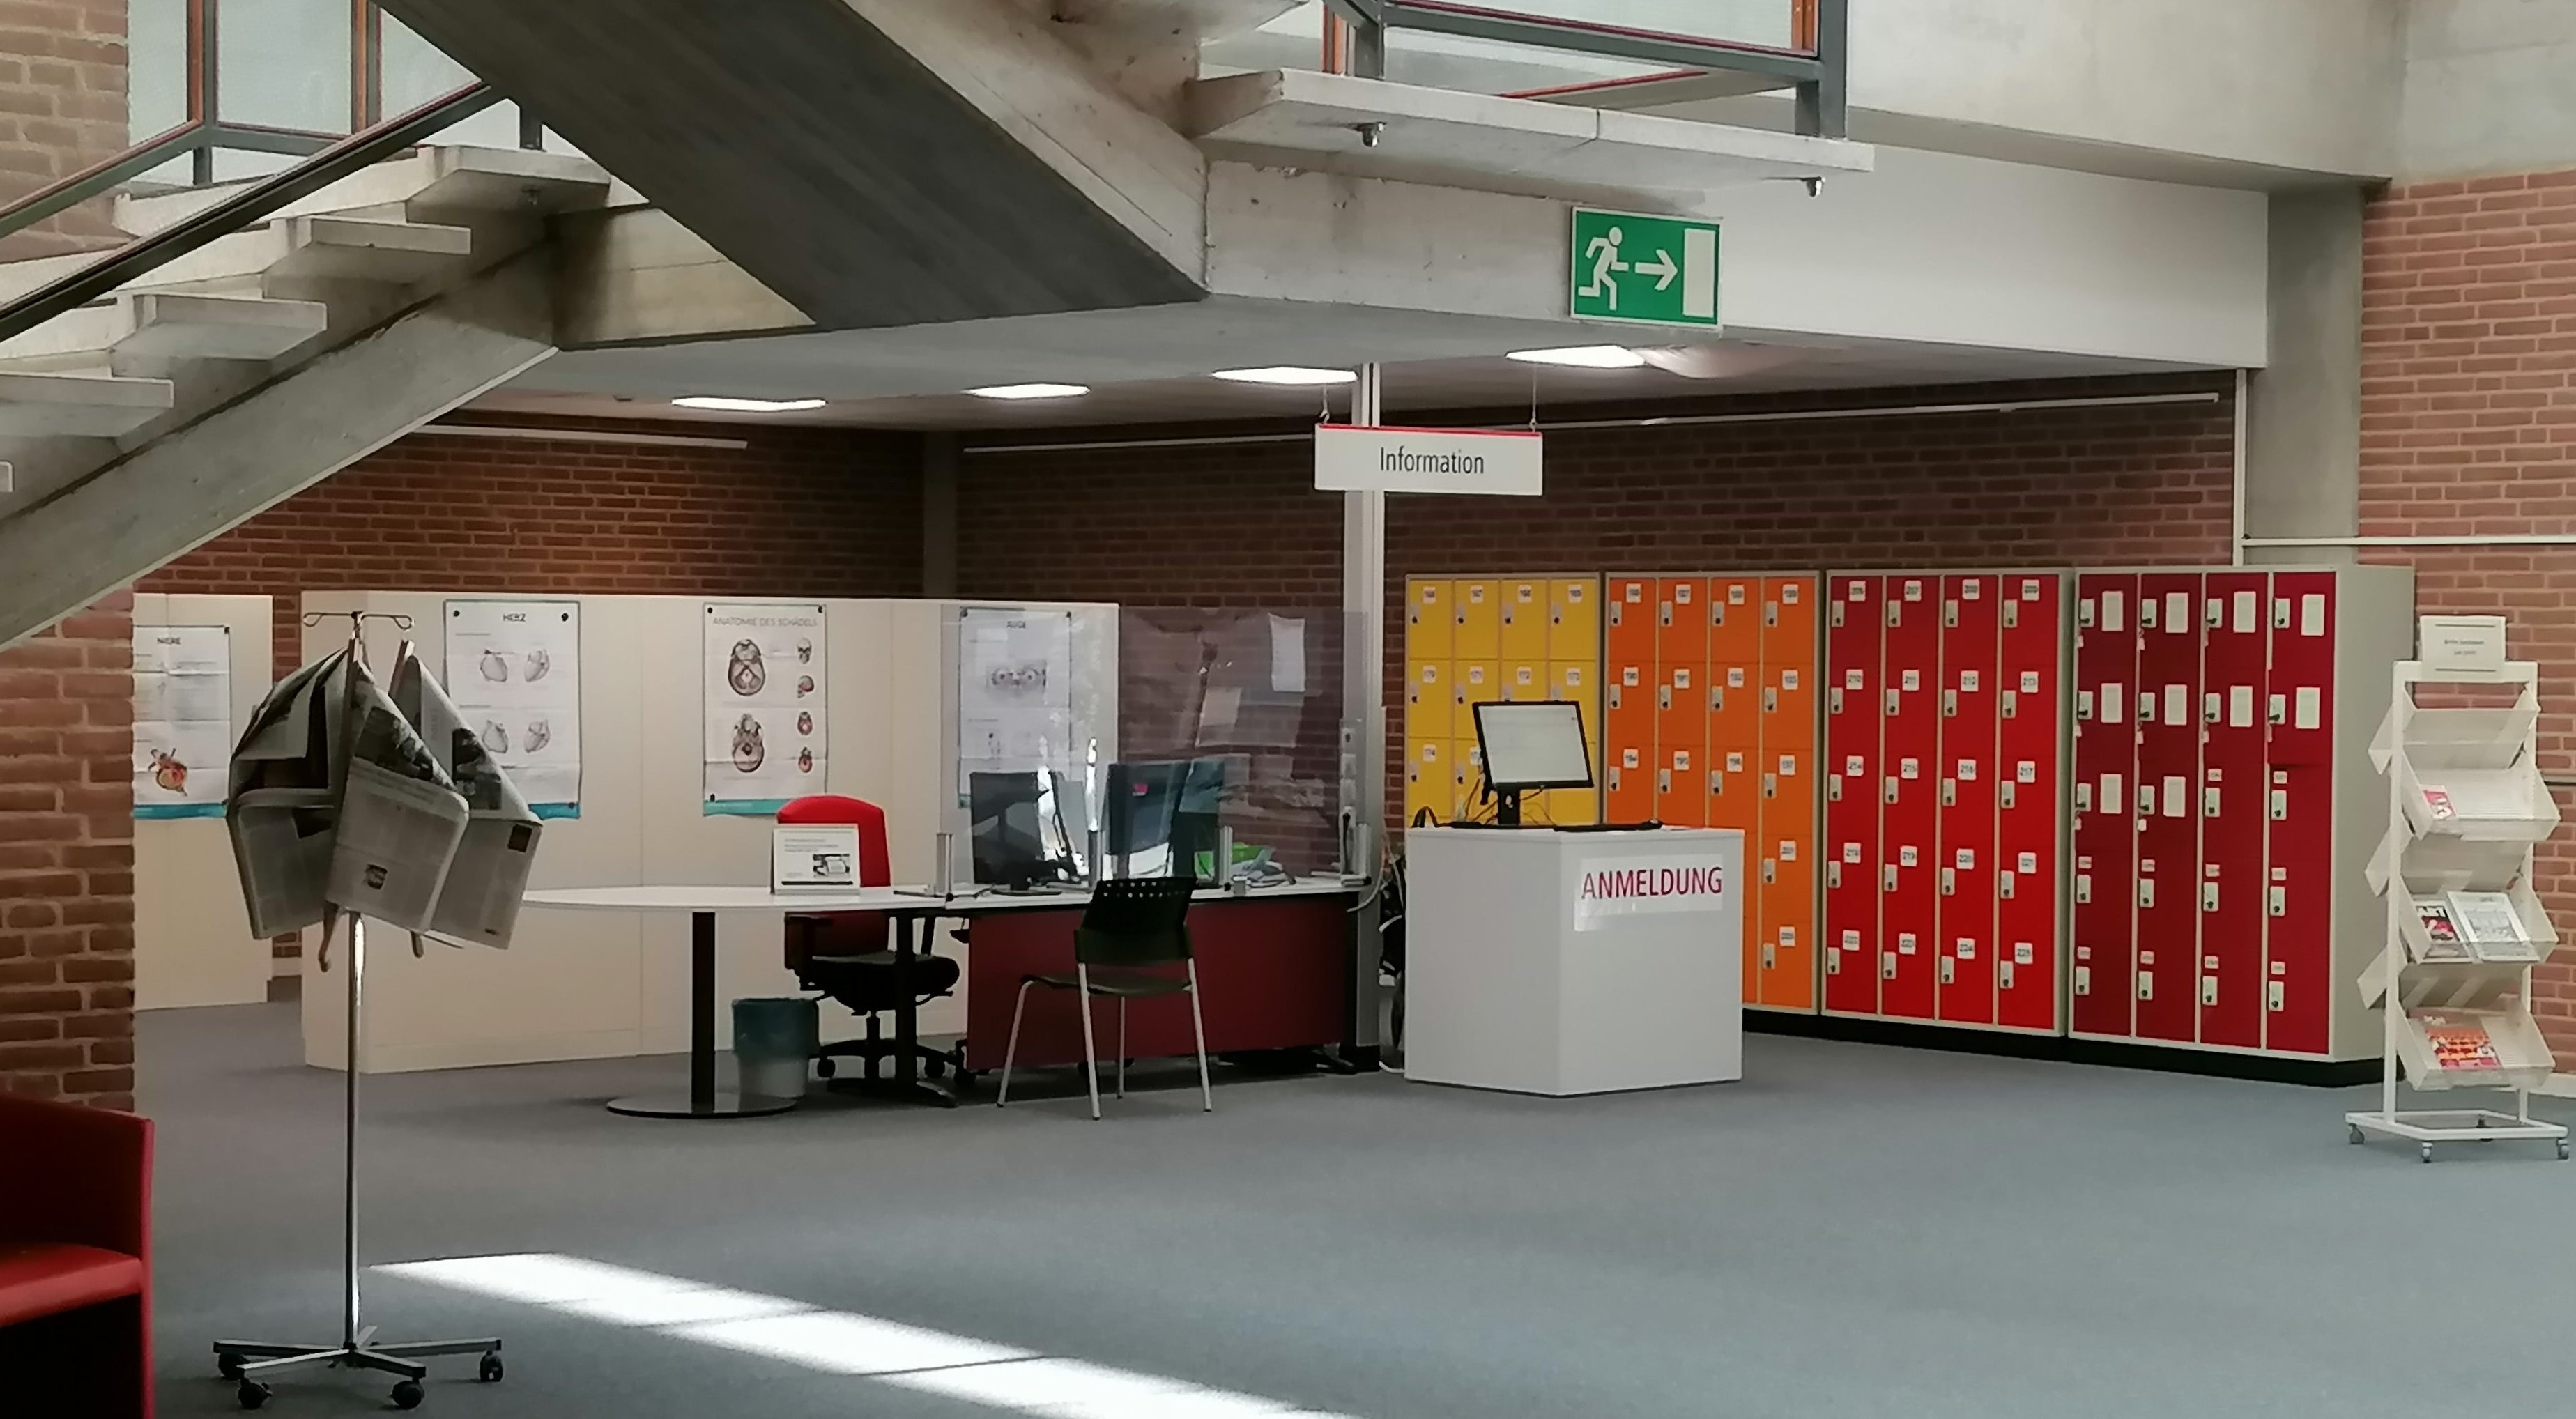 Information desk in the foyer of the library with  lockers  in the background